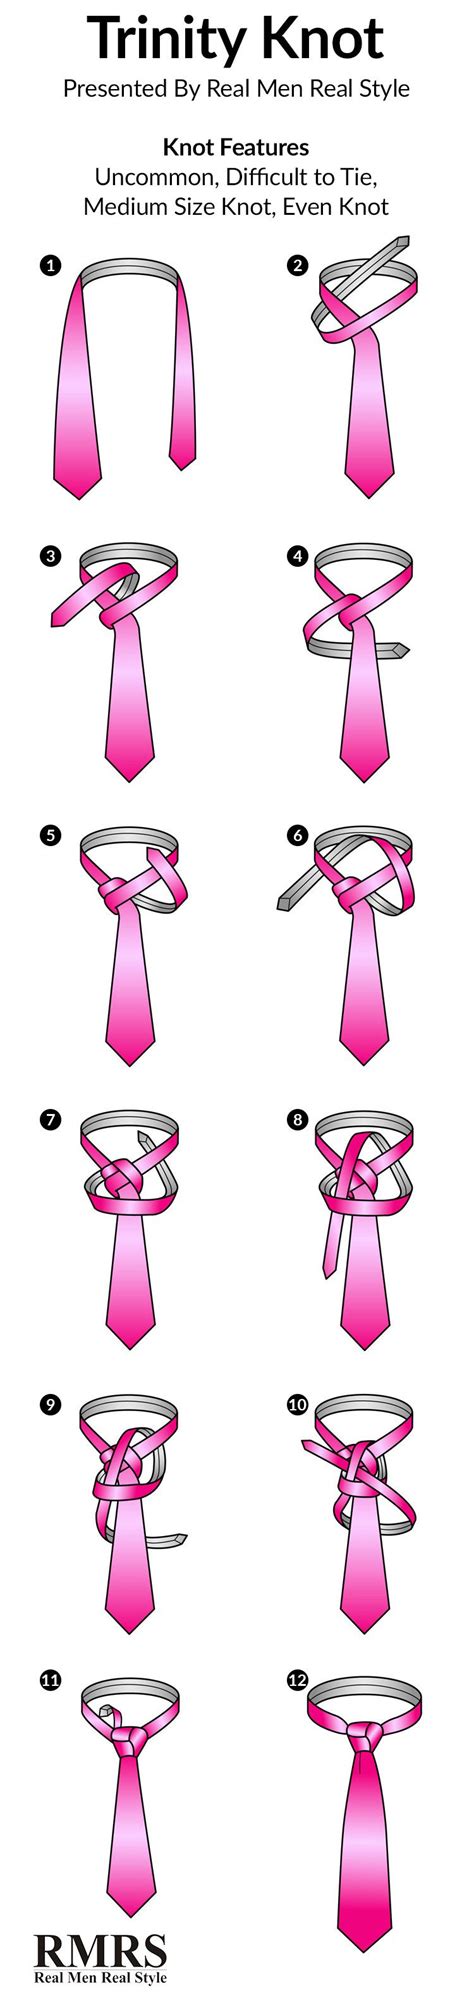 1 why learn how to tie and wear a tie? 3 Crazy Complex Tie Knots Made Easy! | Necktie Knot Tutorial